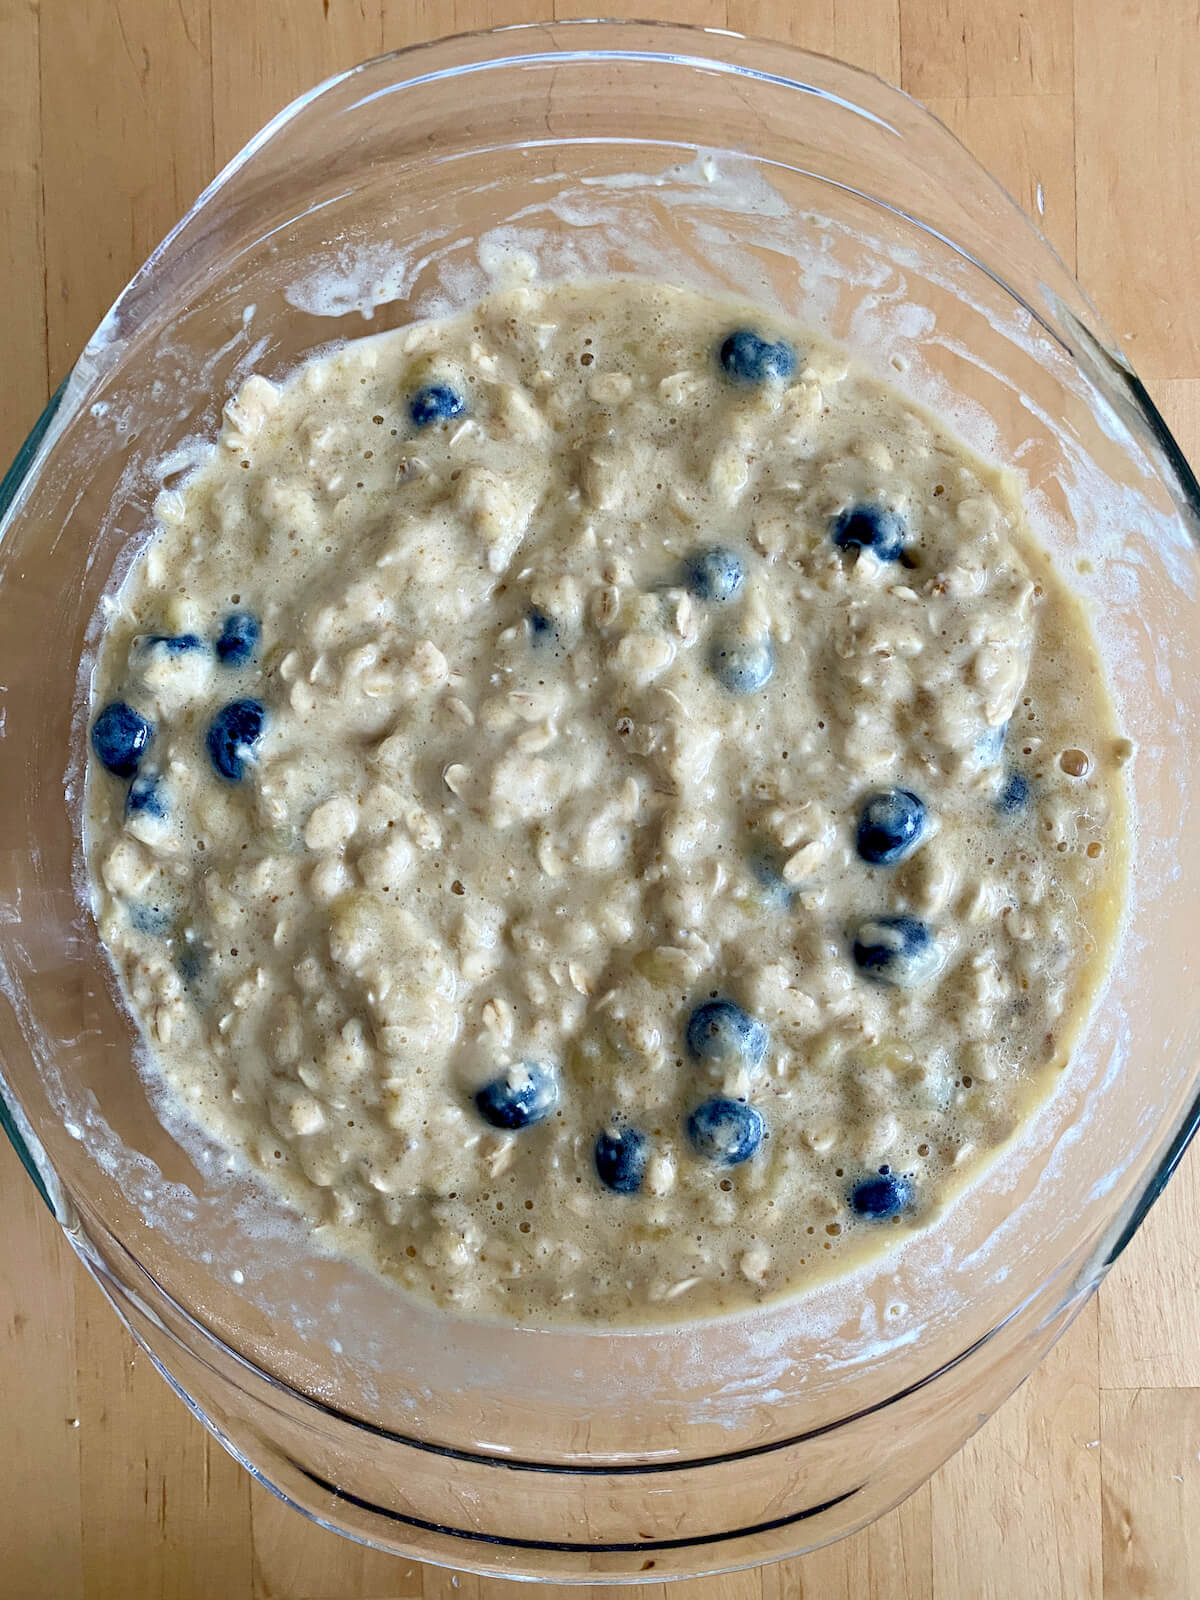 The banana blueberry oatmeal muffin batter in a glass mixing bowl.